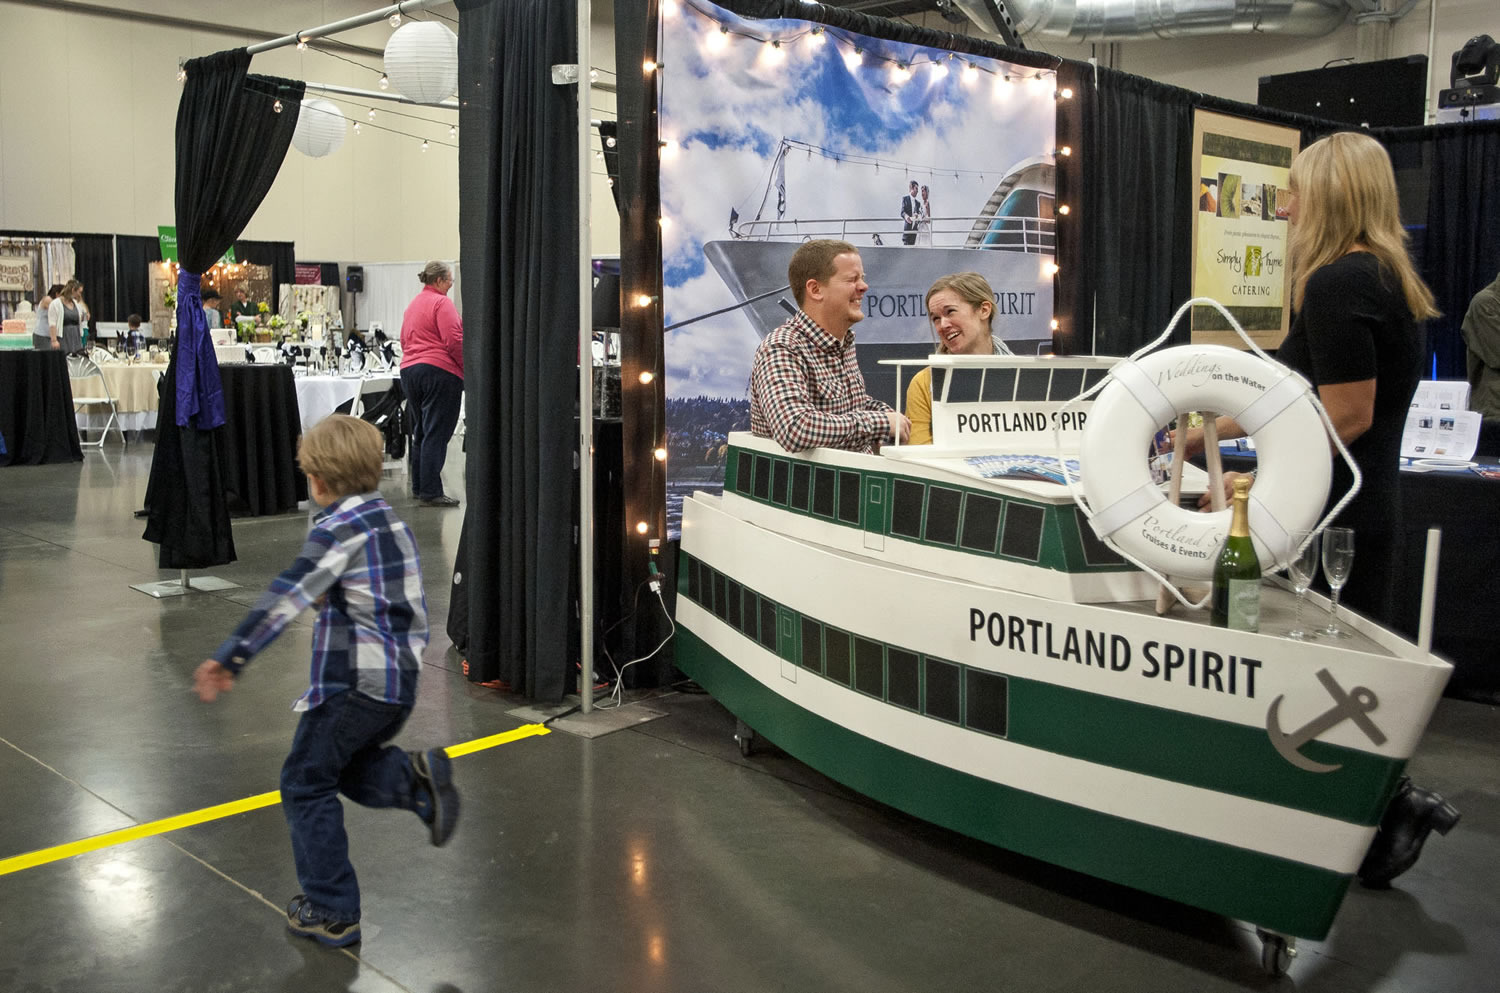 Brittany Weber, 23, and her boyfriend Scott Cook, 25, both of Vancouver, sit on Sunday in a mock-up of the Portland Spirit, a boat used as a wedding venue.